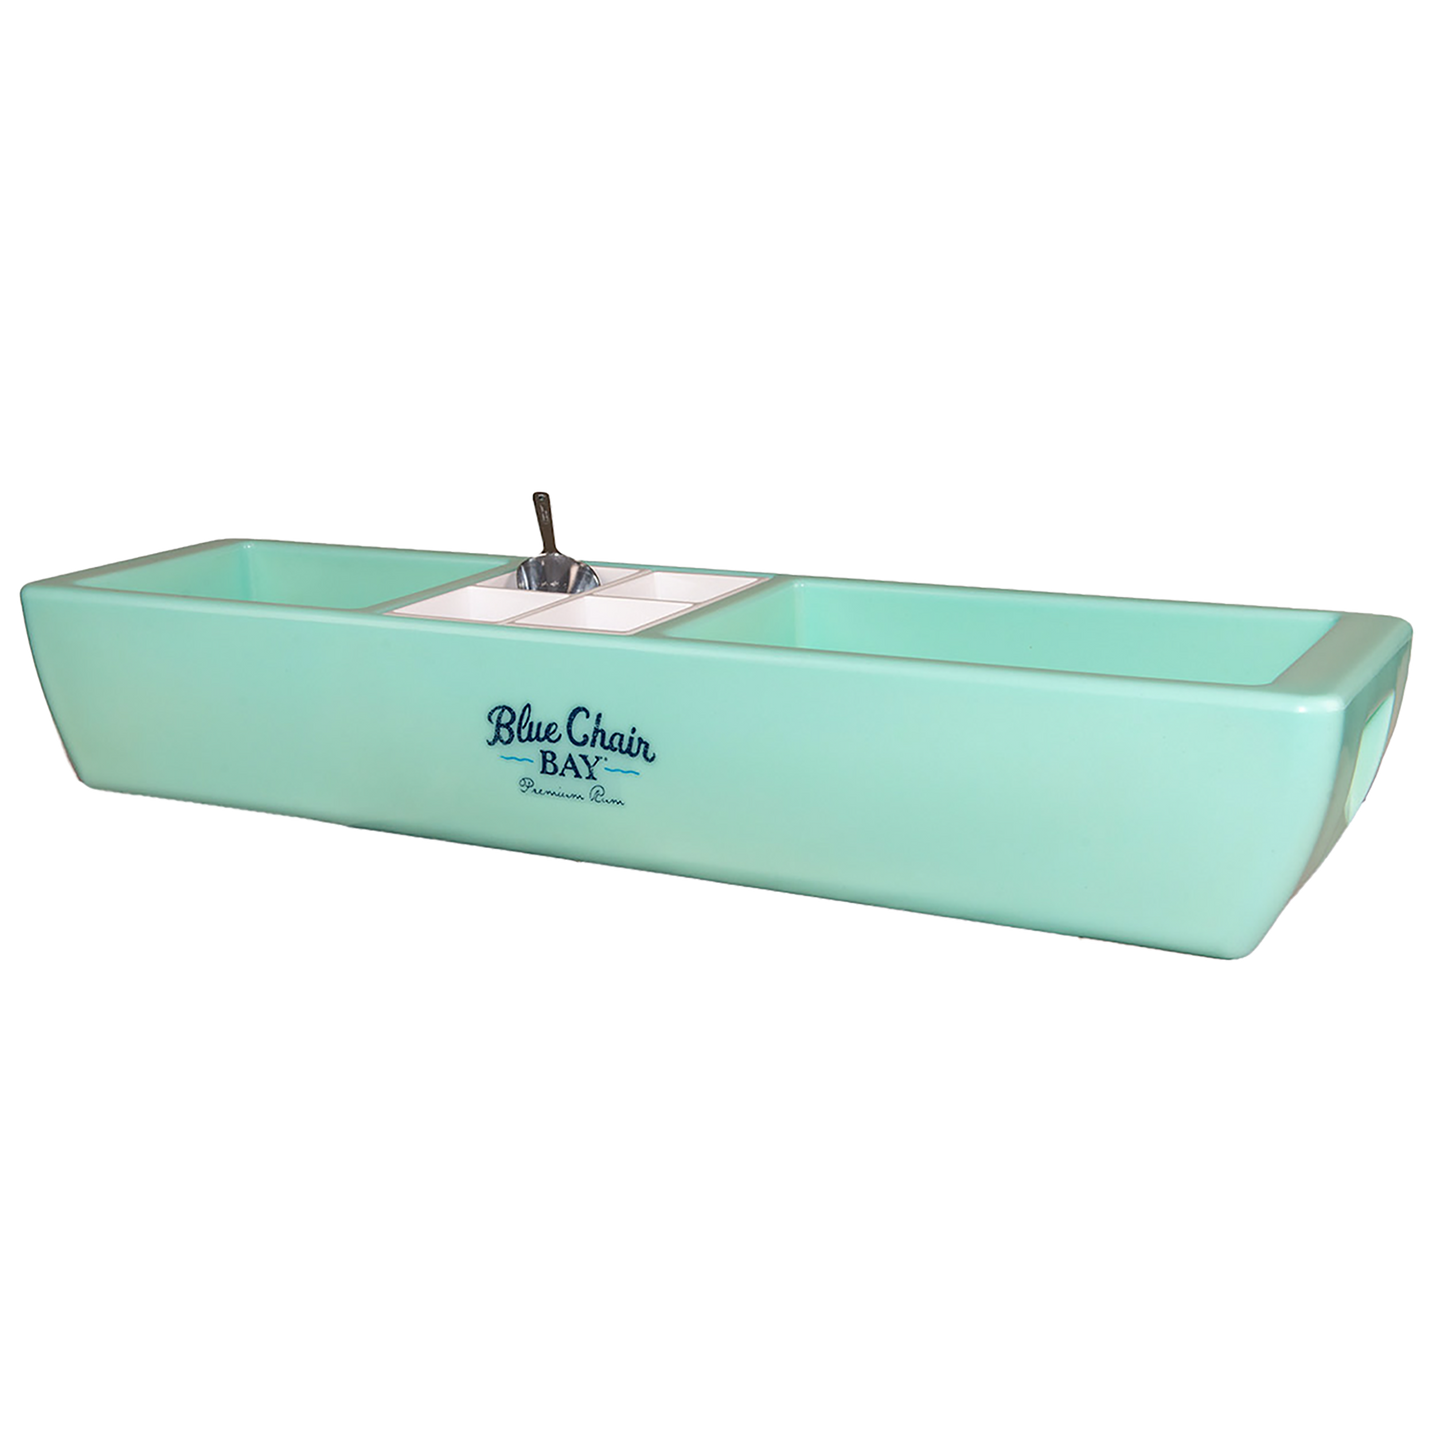 Revo Party Barge Cooler